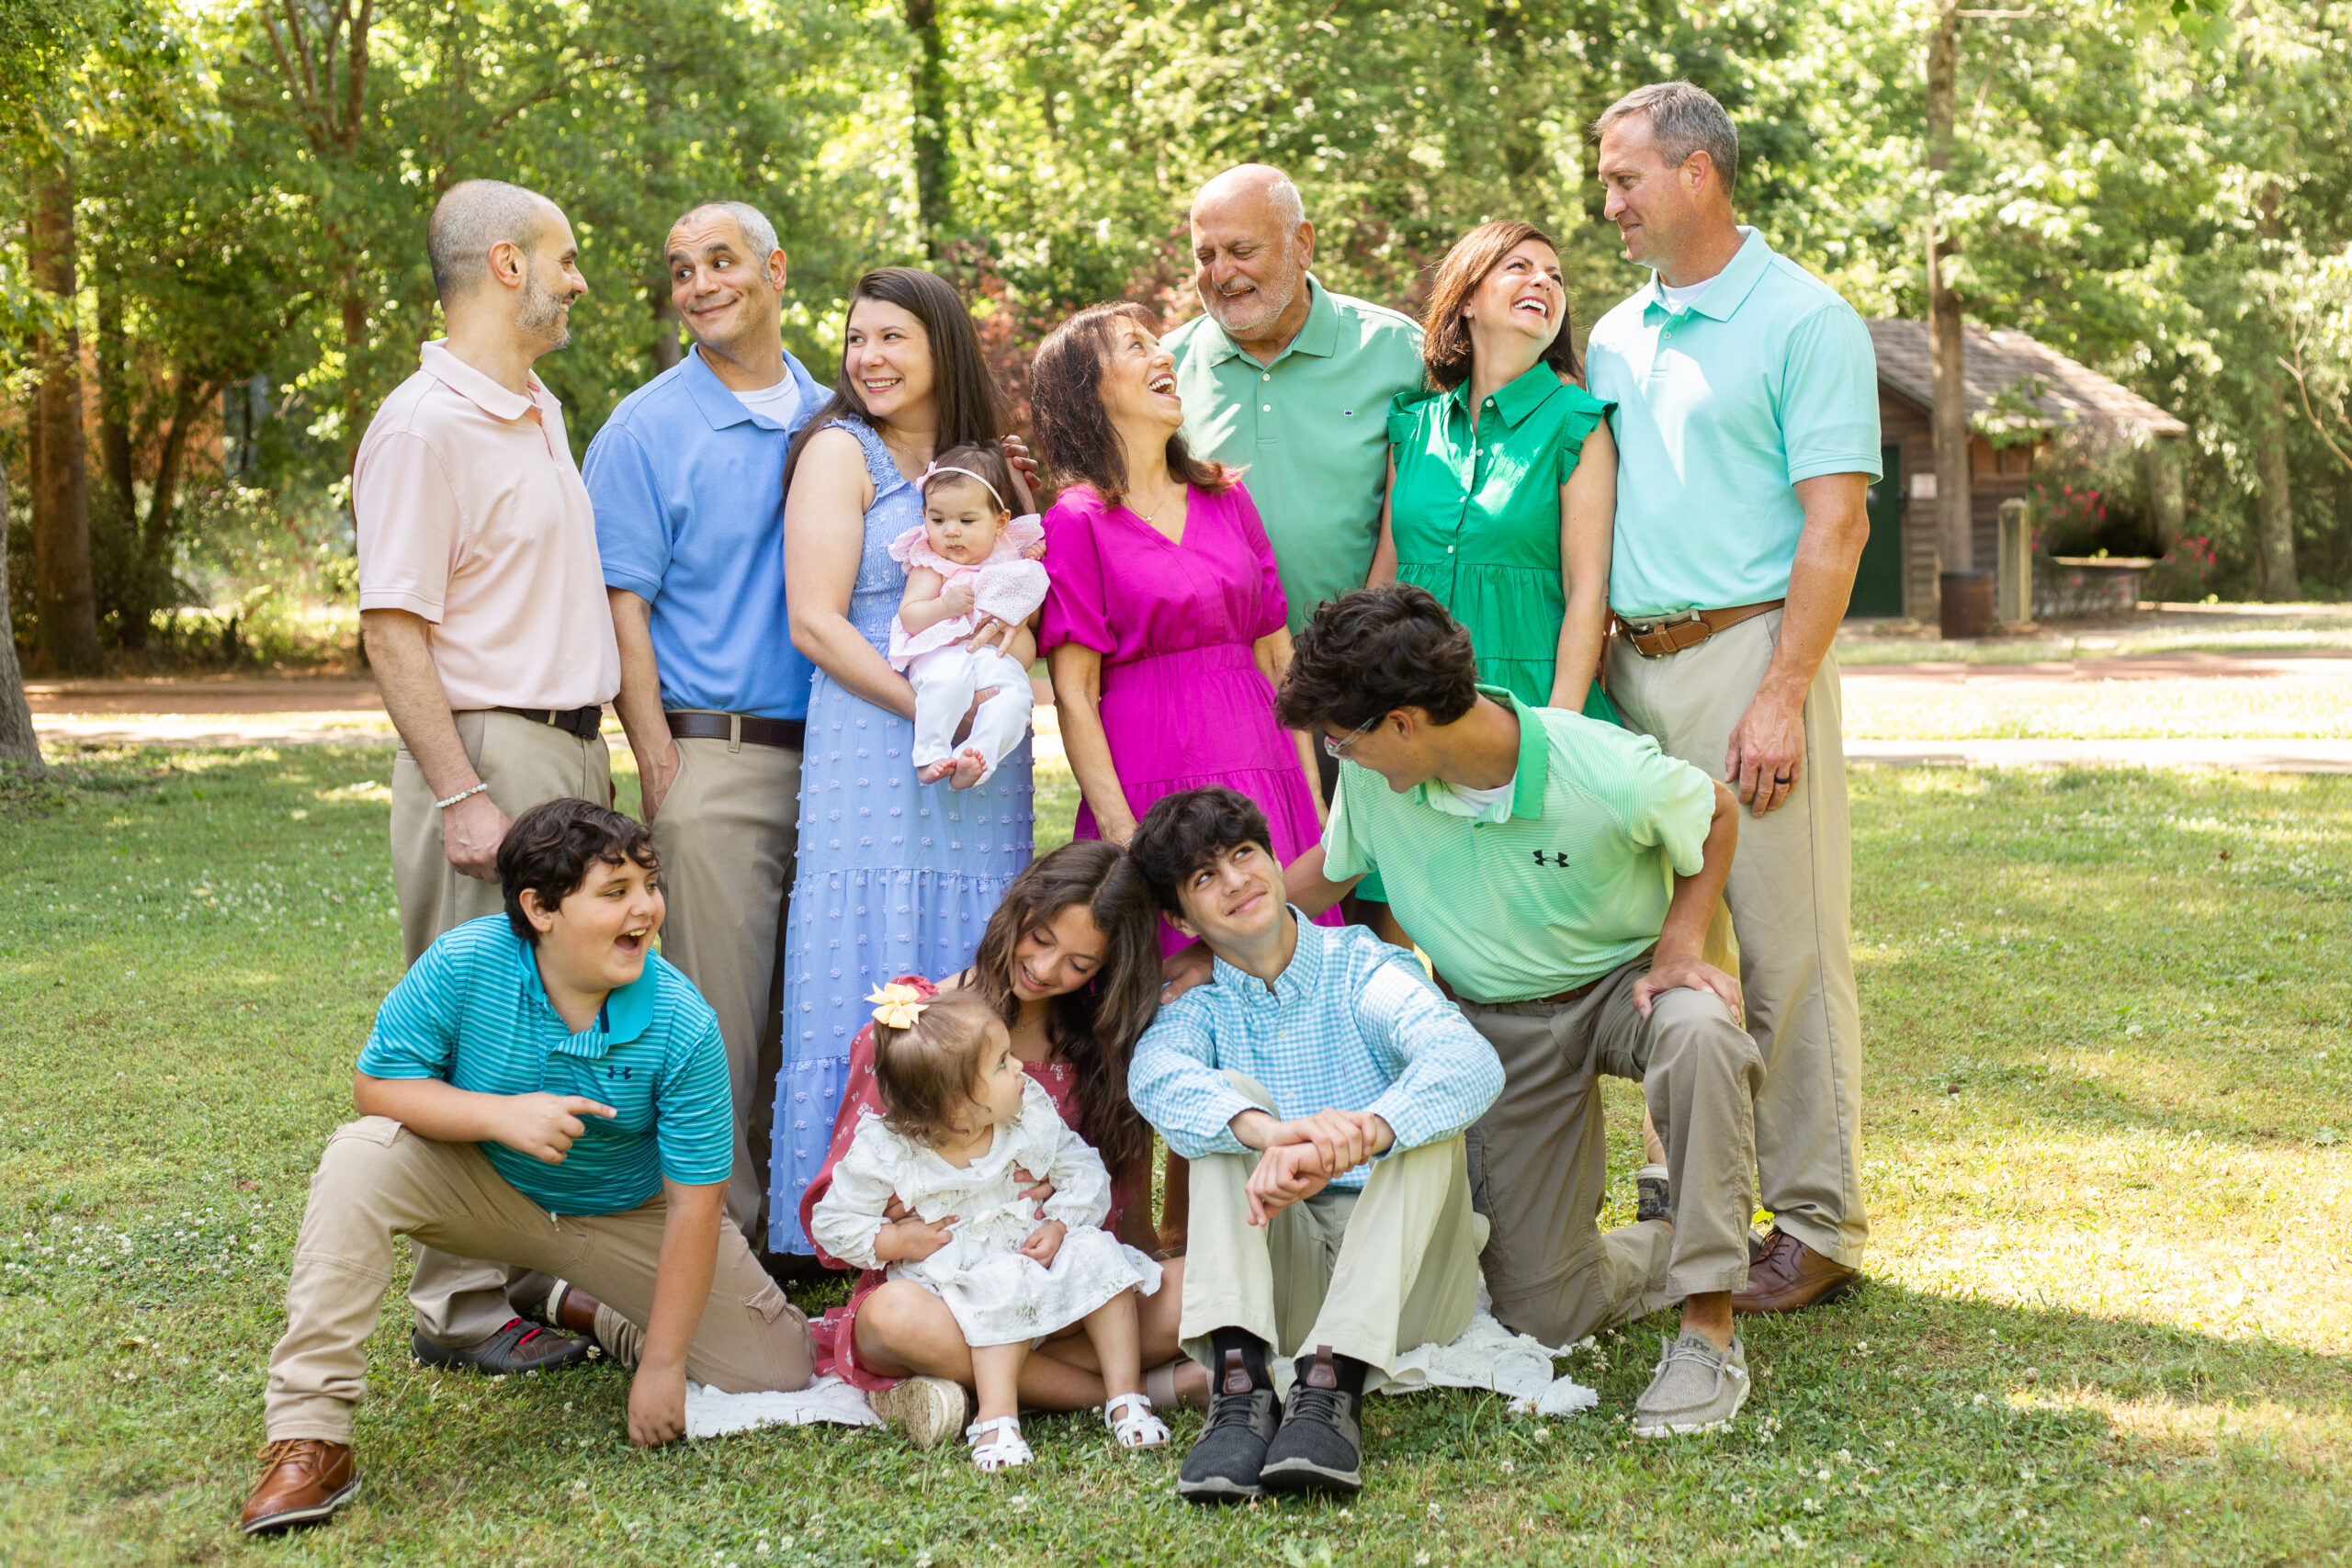 Family Photo session in a park in Birmingham, Alabama